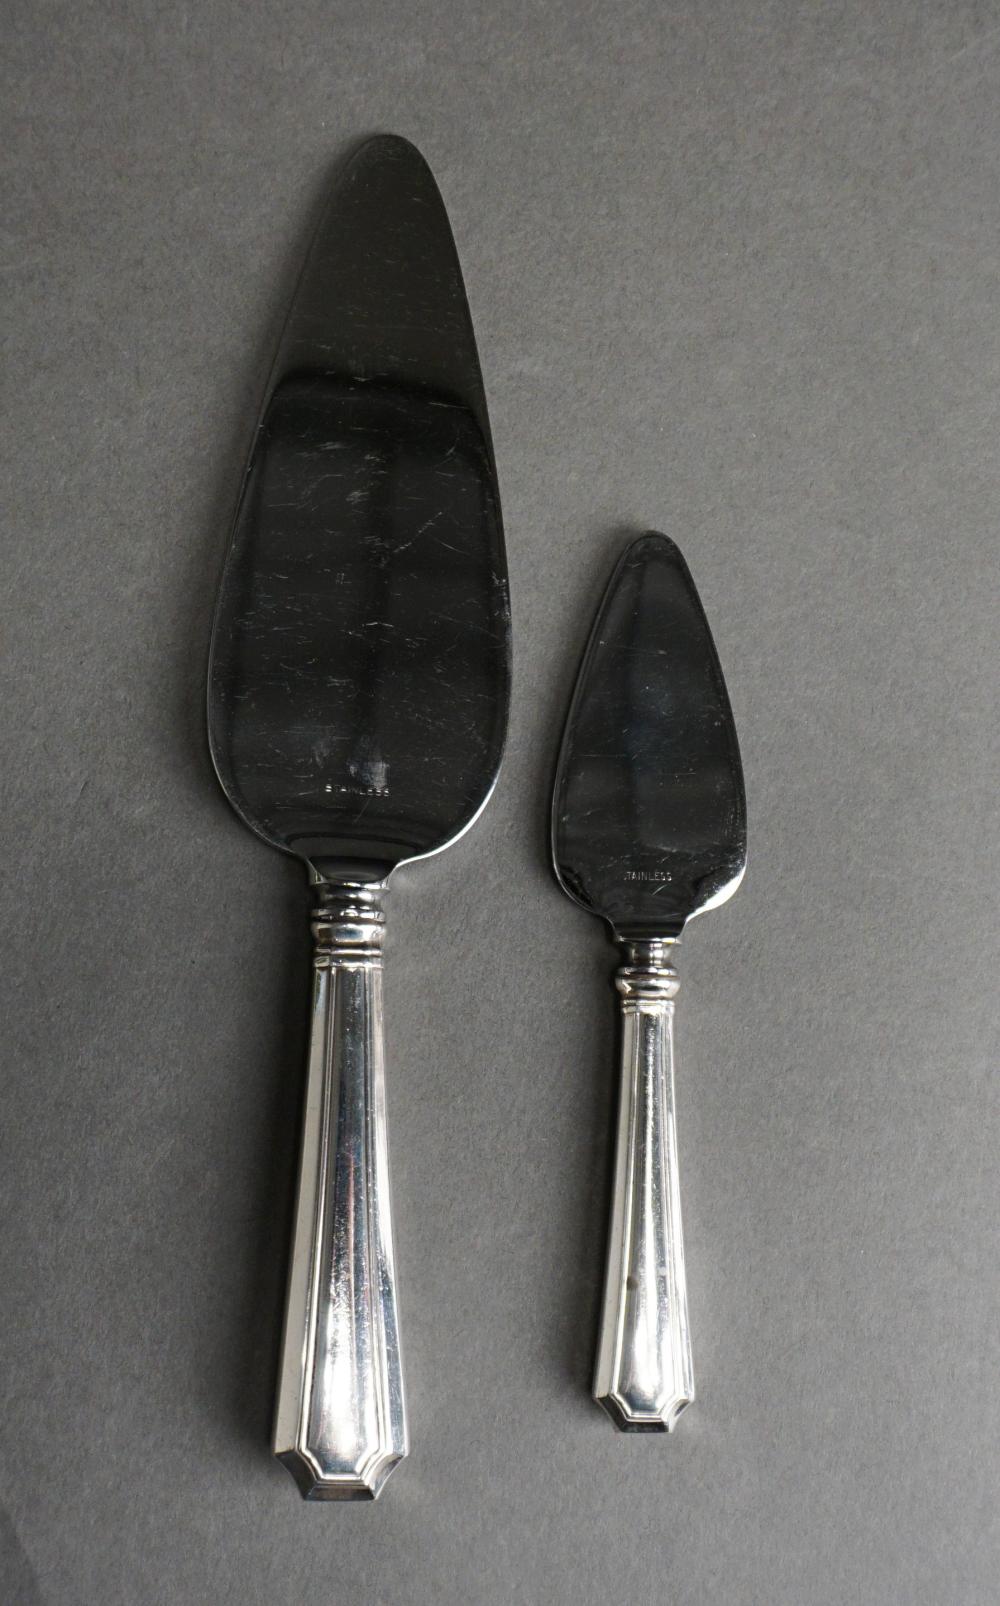 TWO STERLING SILVER HANDLE CAKE 32e757